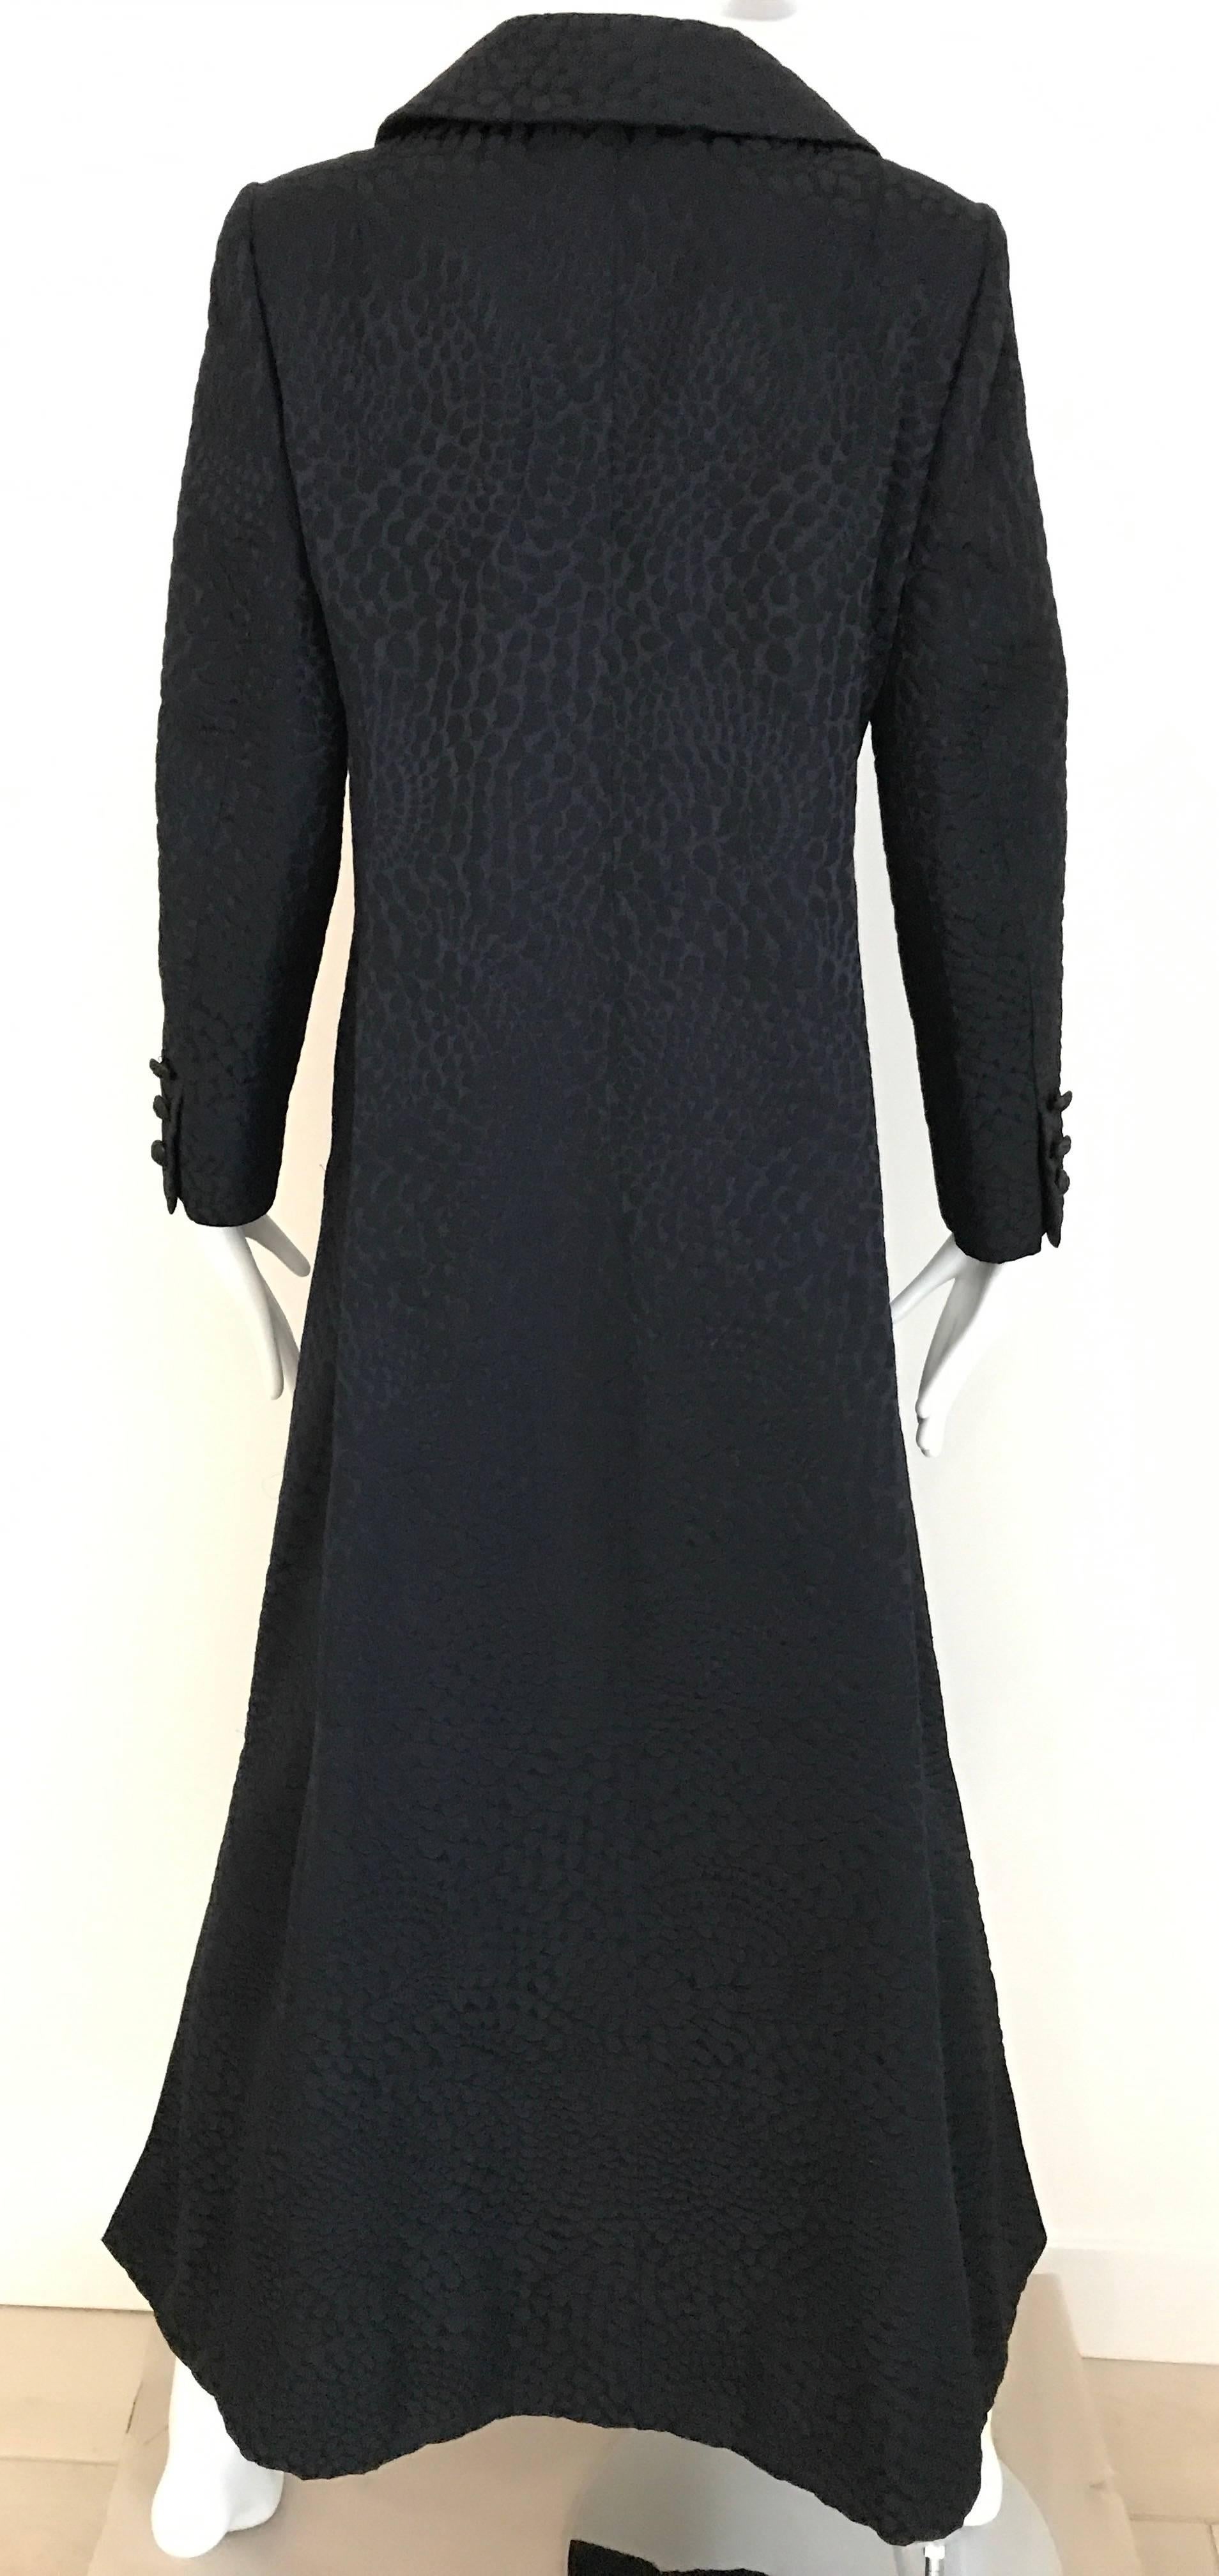 1960s  Black Cotton Jacquard evening  long coat/ Jacket with 2 front pockets.. This coat is in excellent condition and is barely worn. coat is  lined beautifully in silk jacquard. Fitted slimming look. Label: Eres Couture 
Size Small - Medium ( 4 /